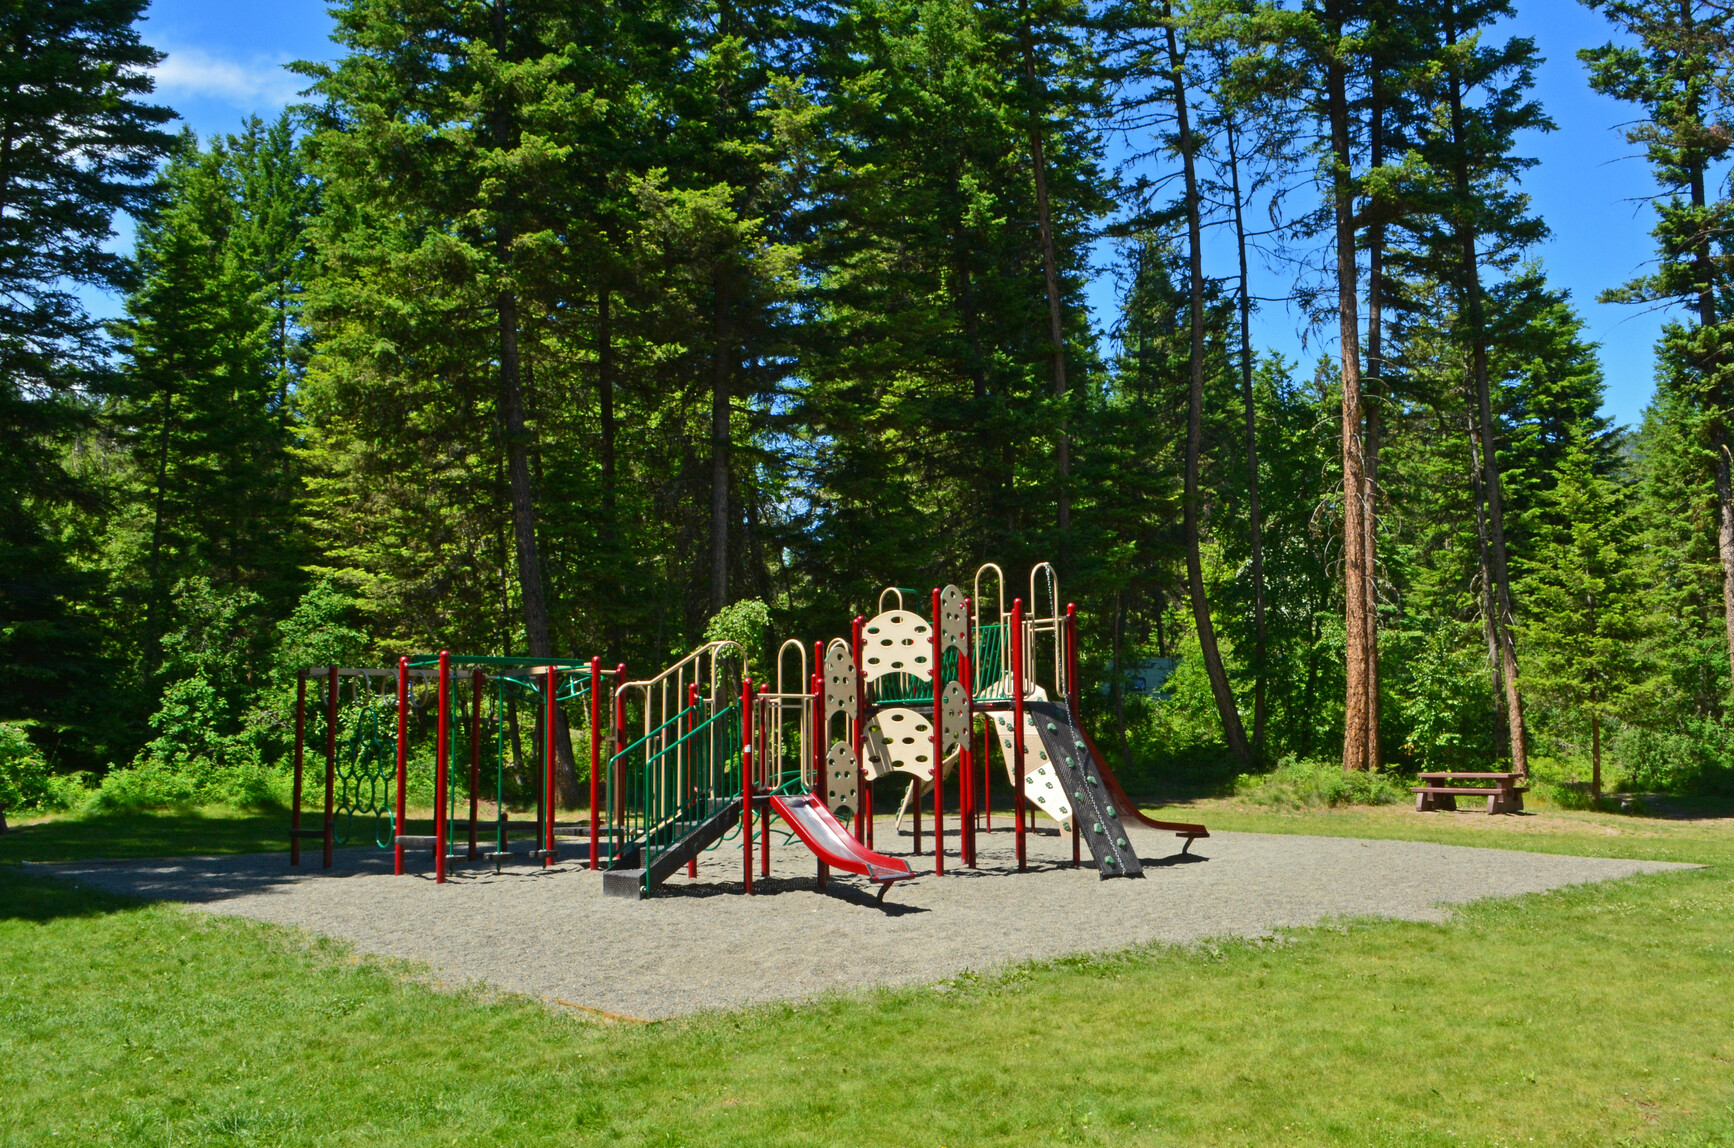 Playground and picnic table by the forest in the park.